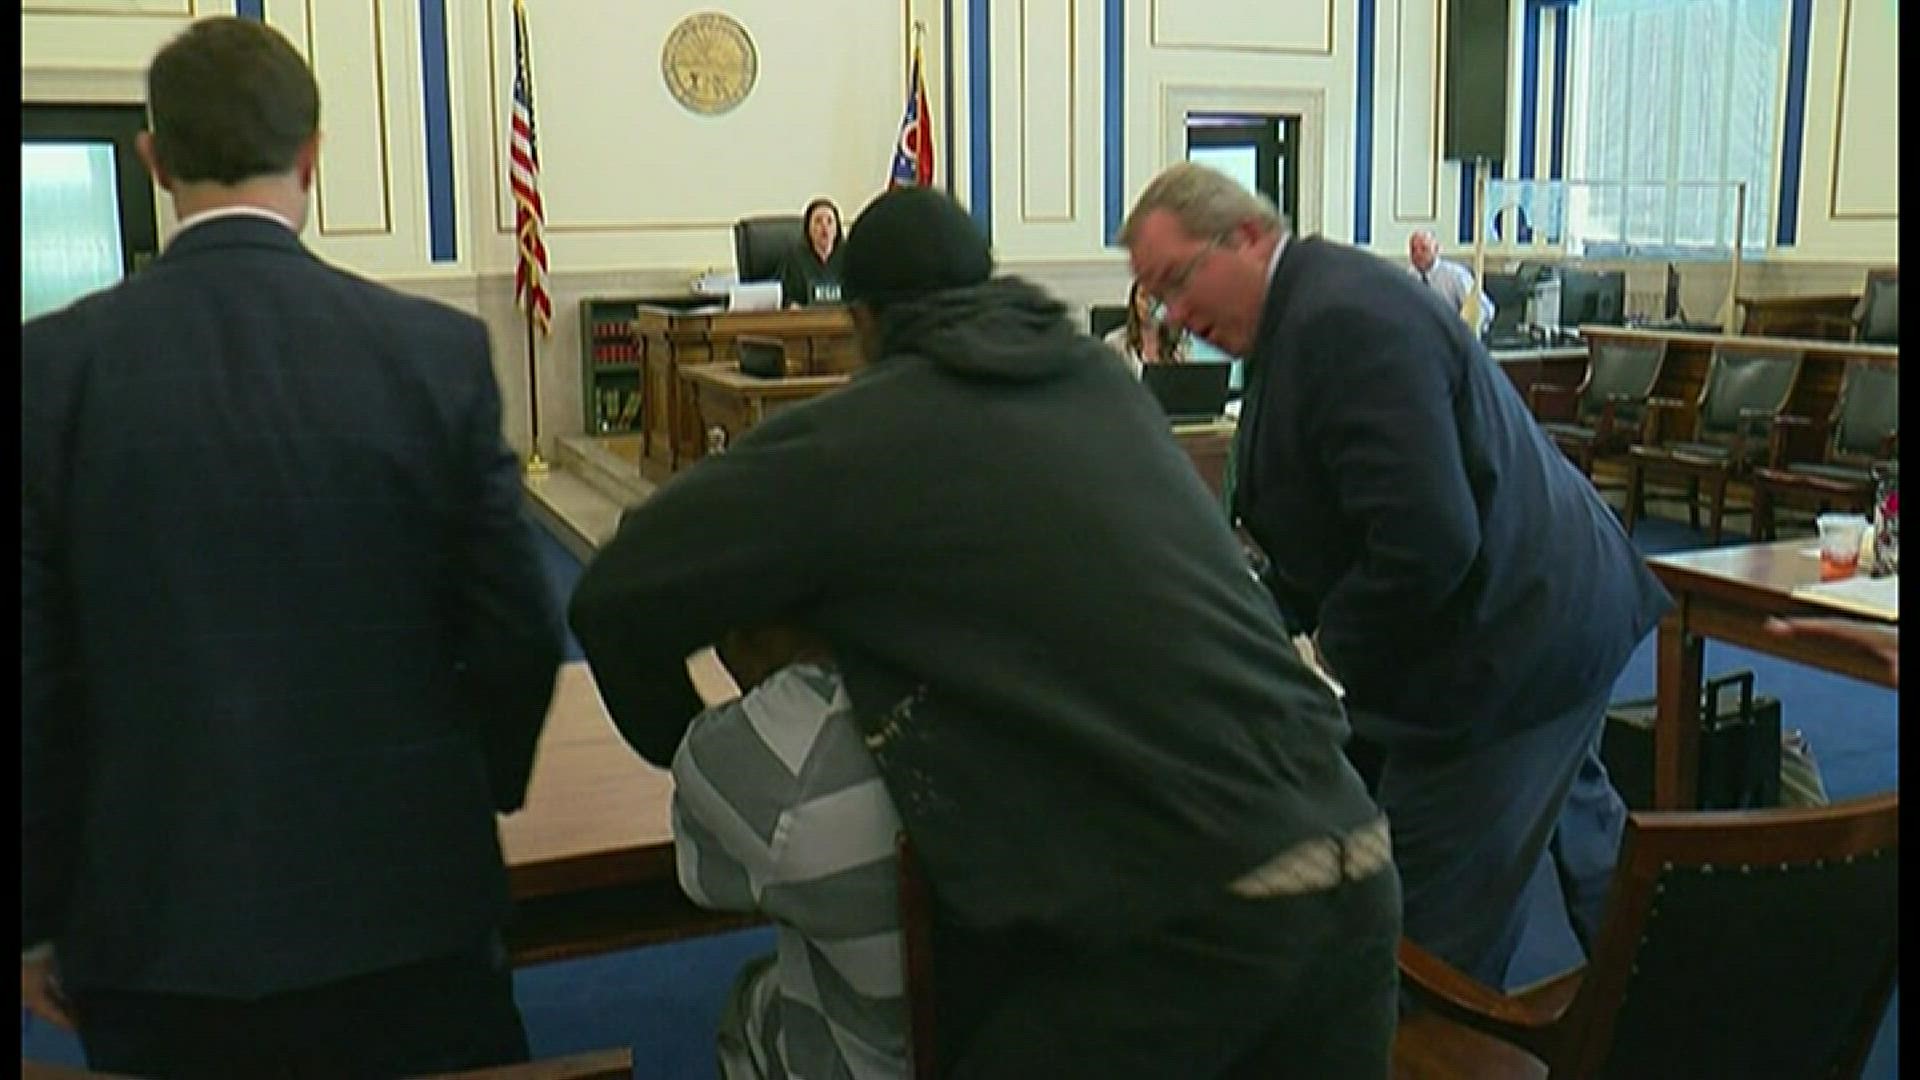 Antonio Hughes lunged at and punched DeSean Brown several times in a Cincinnati court on Thursday.